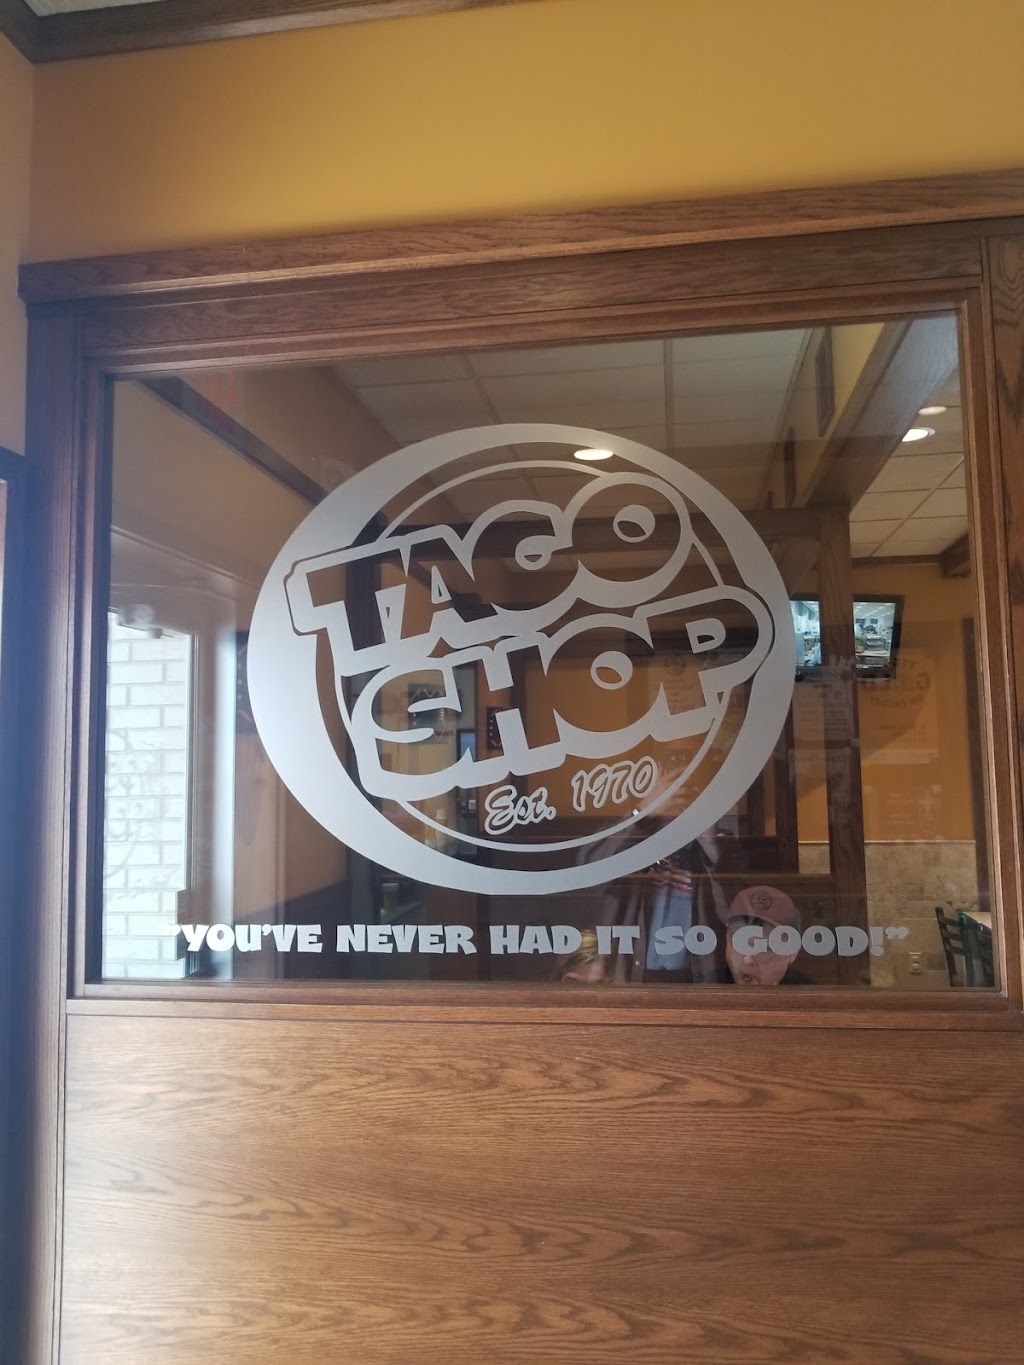 Taco Shop | meal delivery | 333 8th St, Hays, KS 67601, USA | 7856257114 OR +1 785-625-7114